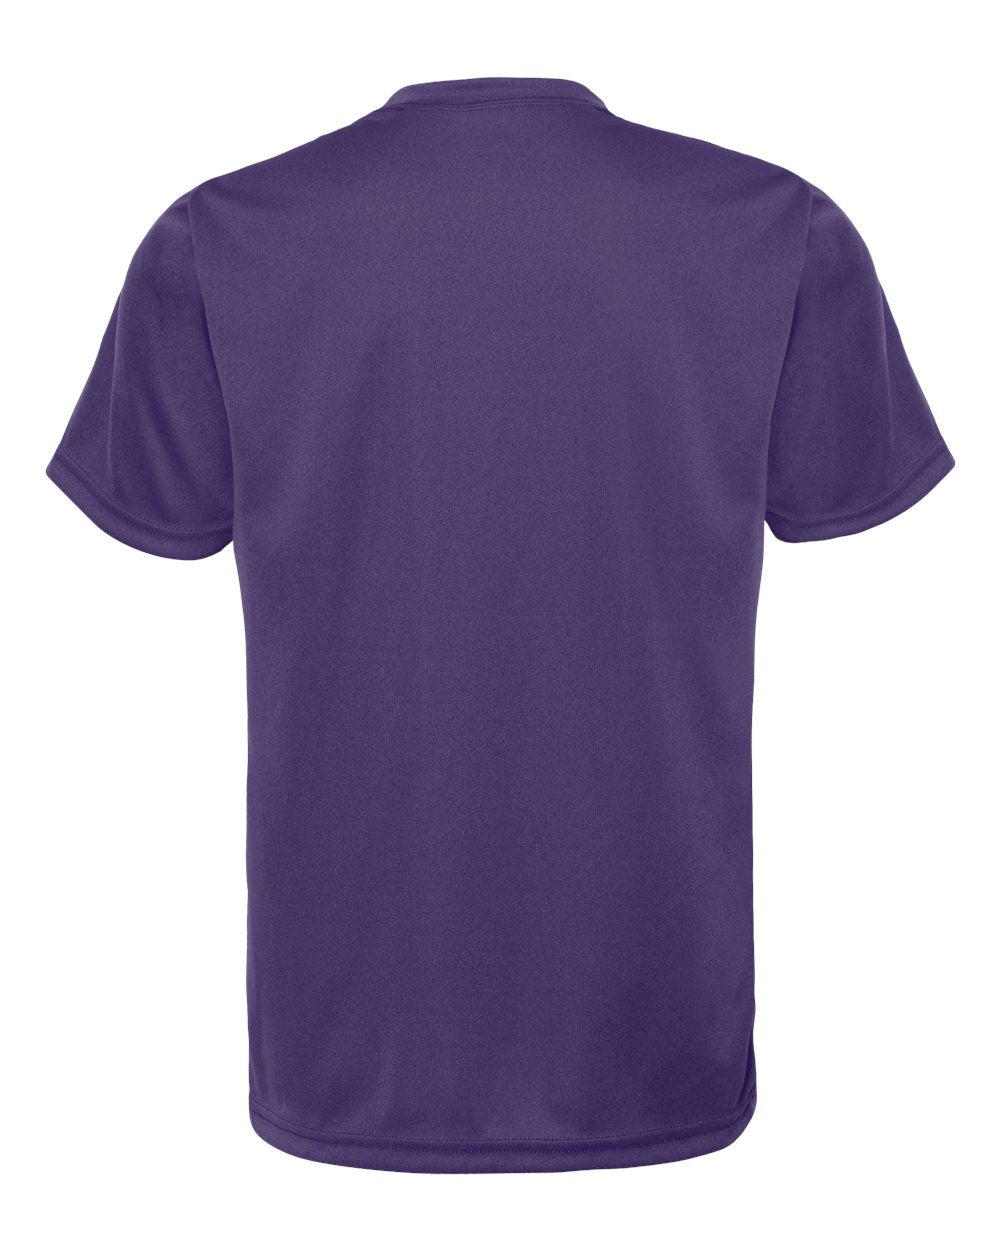 C2 Sport Youth Performance T-Shirt 5200 #color_Purple